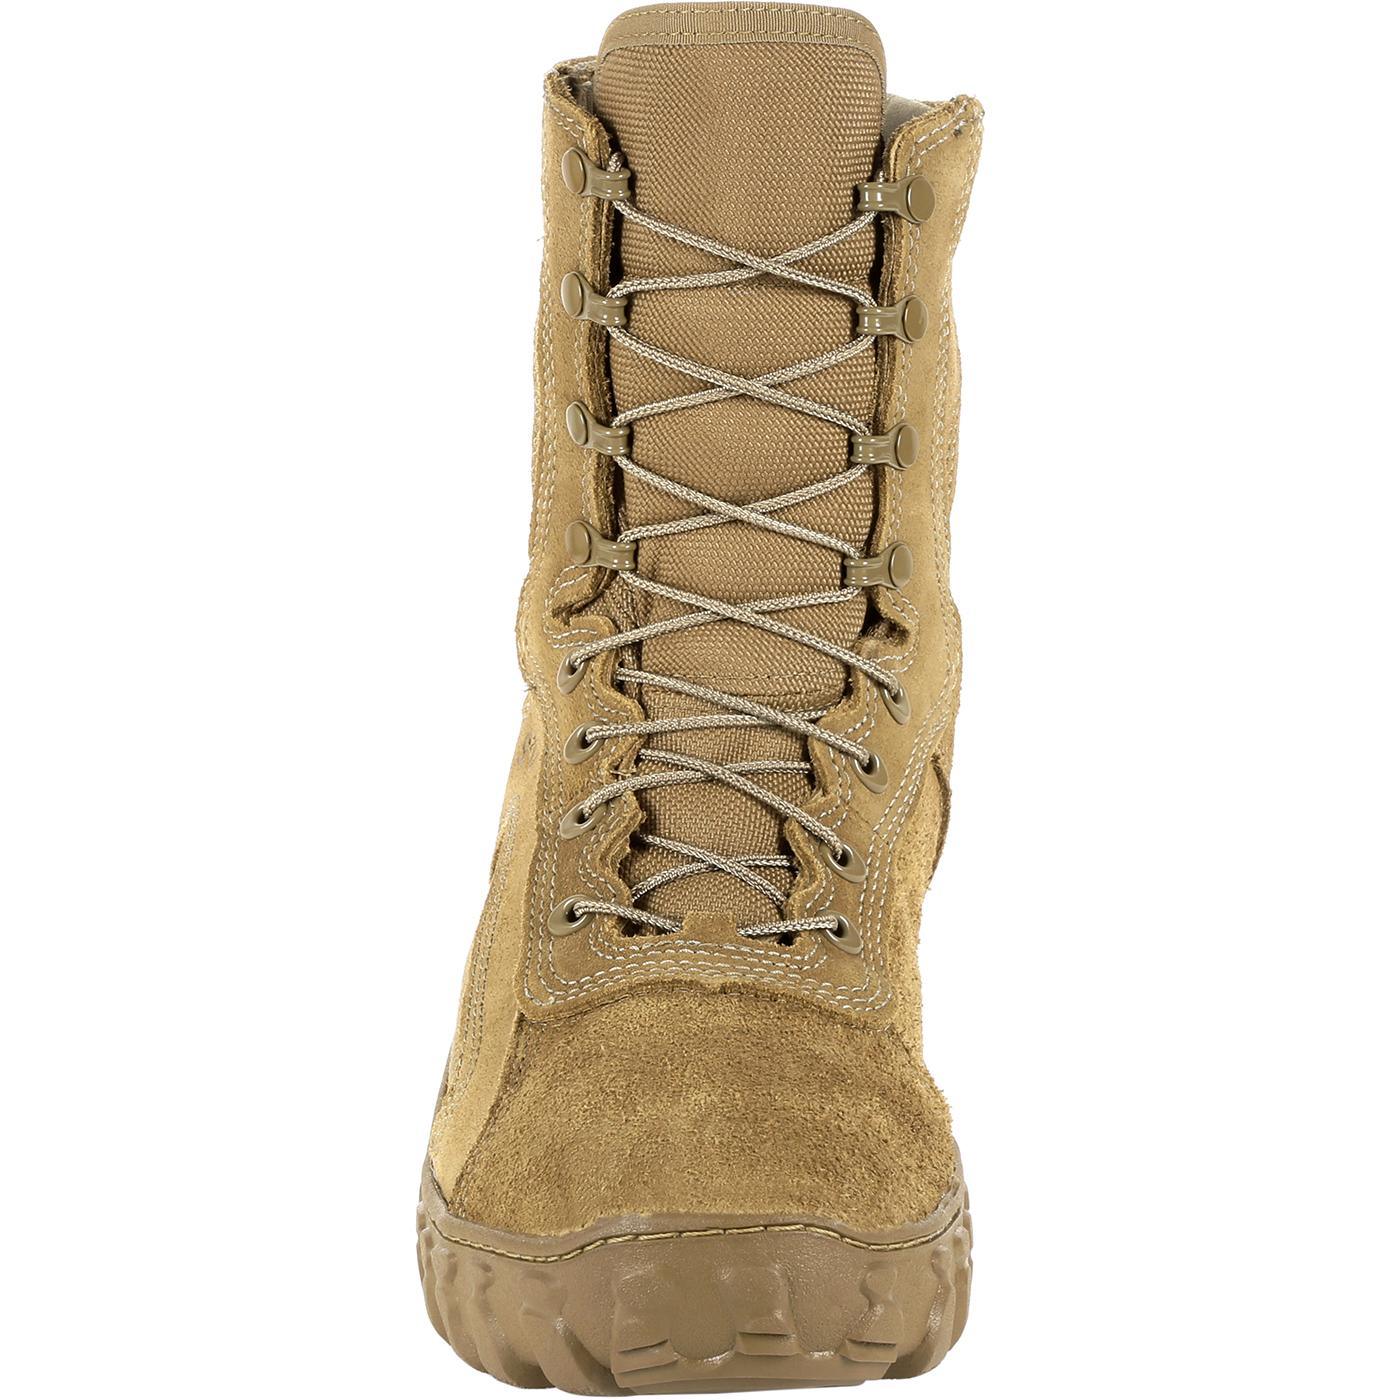 Rocky S2V Waterproof 400G Insulated Military Boot - Flyclothing LLC